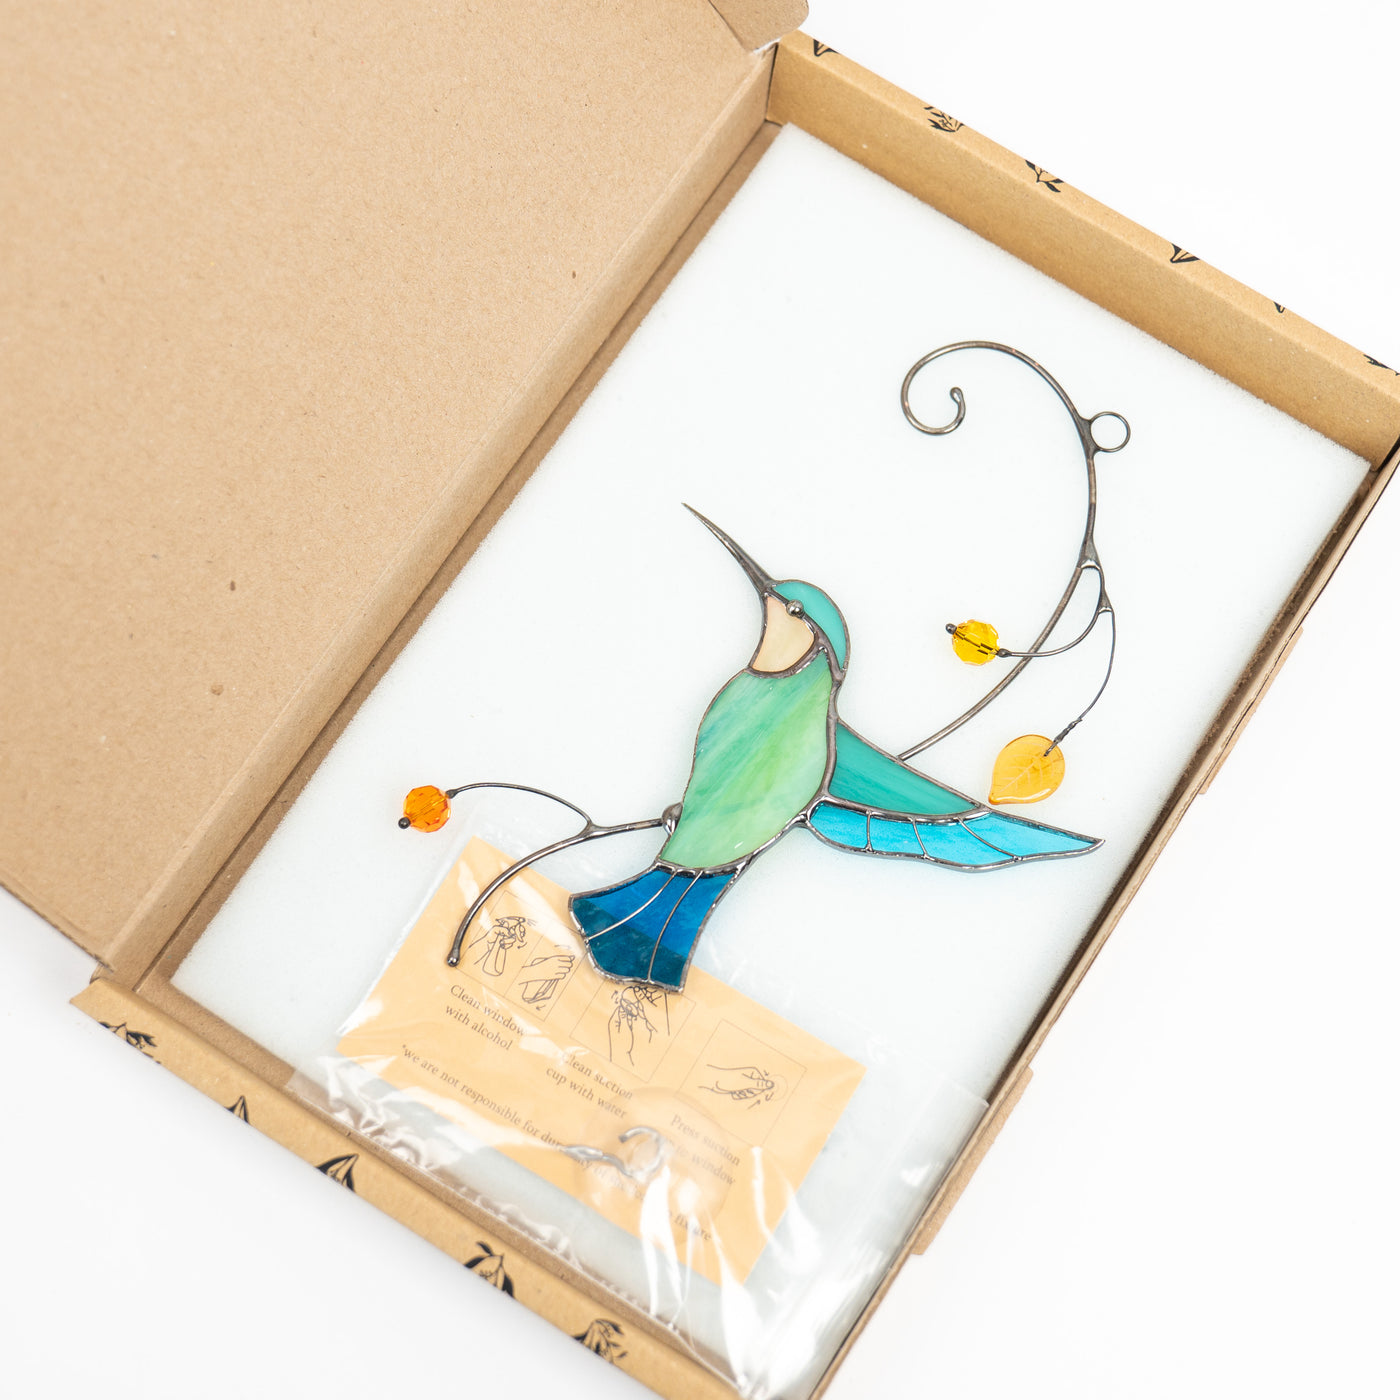 Stained glass hummingbird in a brand box